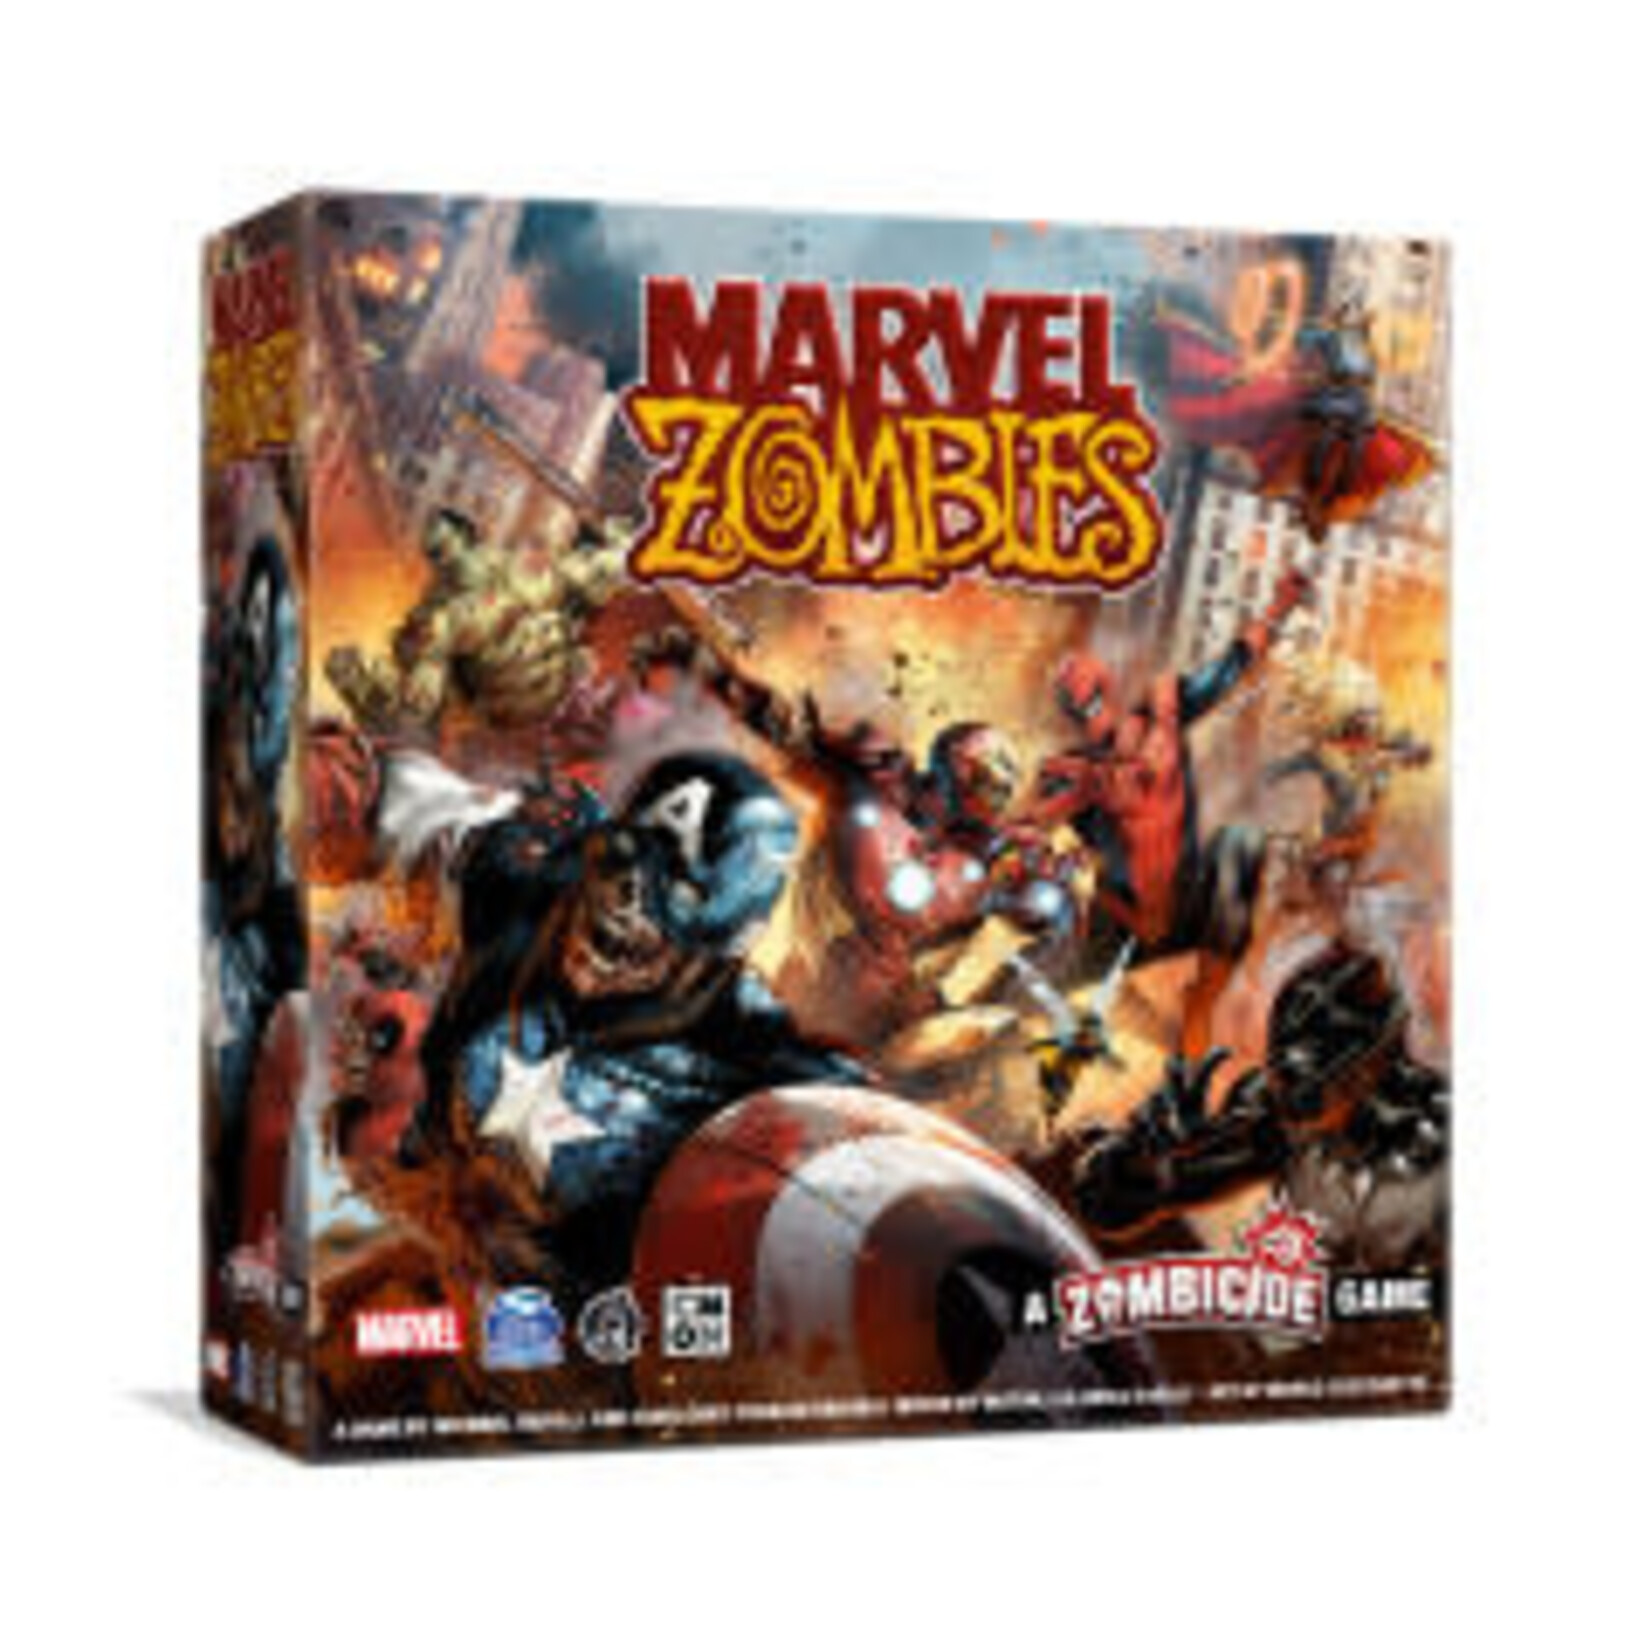 Cool Mini or Not Marvel Zombies: Hungry Pledge